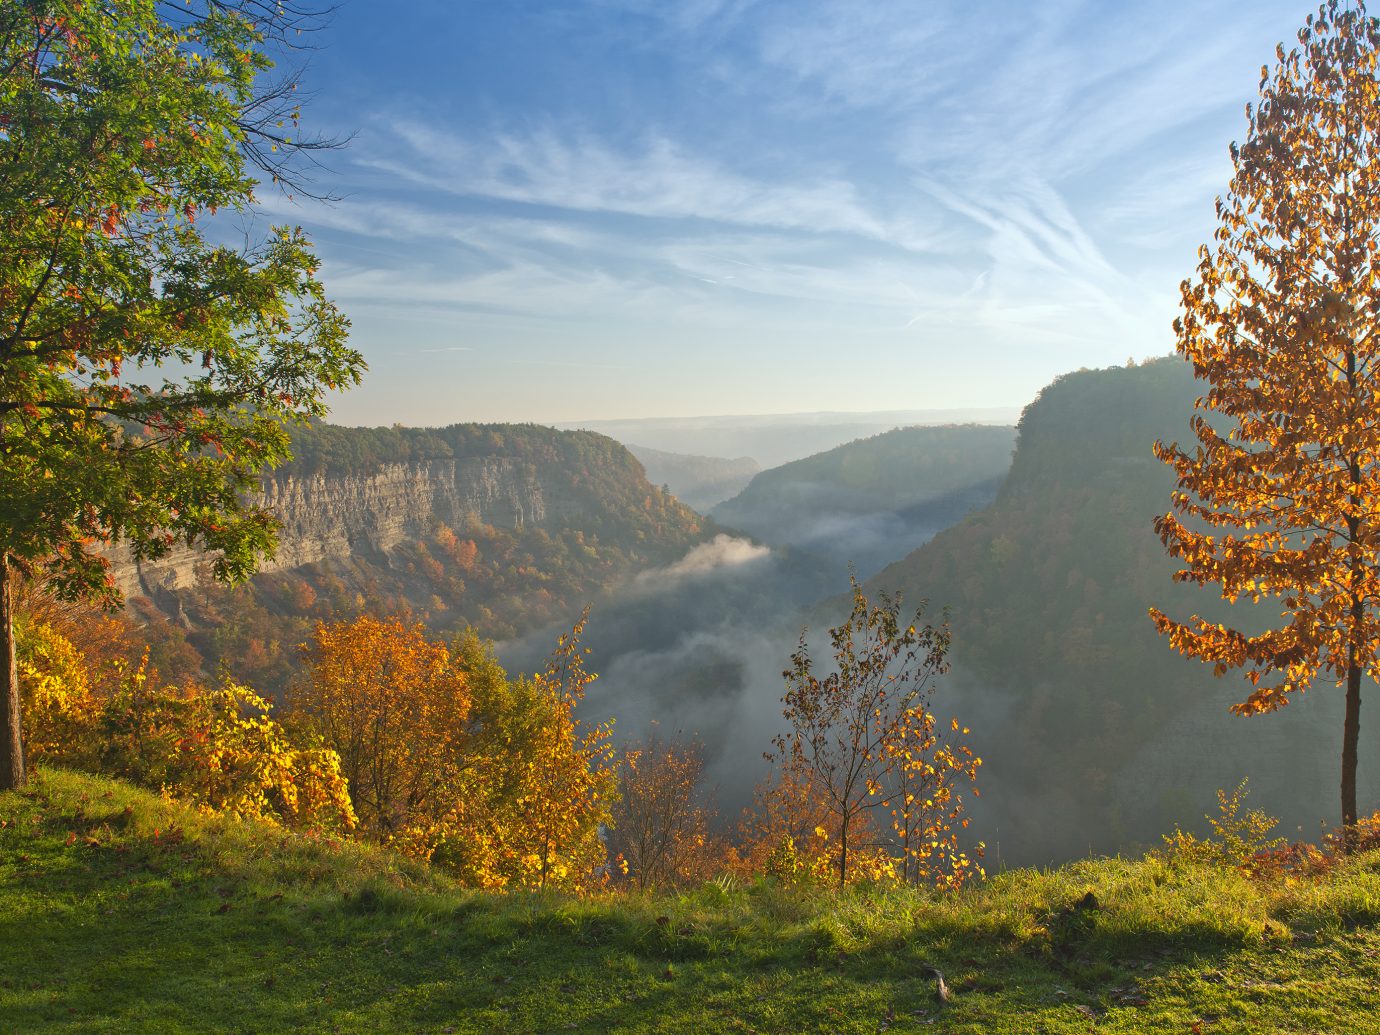 Great Bend Overlook At Letchworth State Park In New York Just After Sunrise.